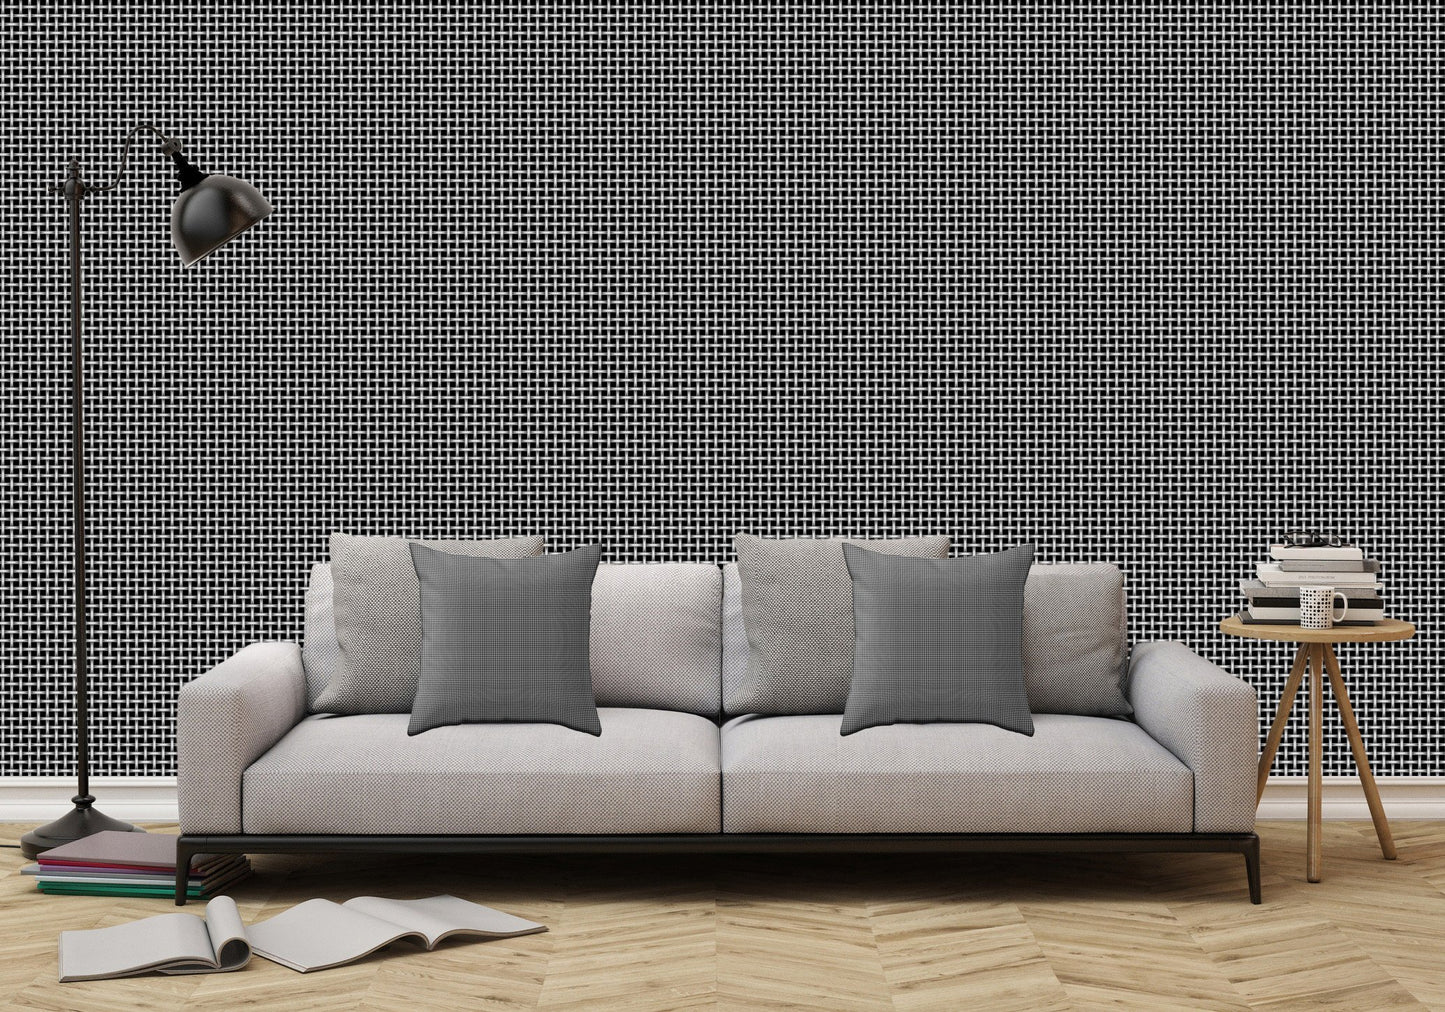 White and Gray Basket Weave Lines on Black - Adhesive Wallpaper - Removable Wallpaper - Wall Sticker - Full Size Wall Mural  - PIPAFINEART